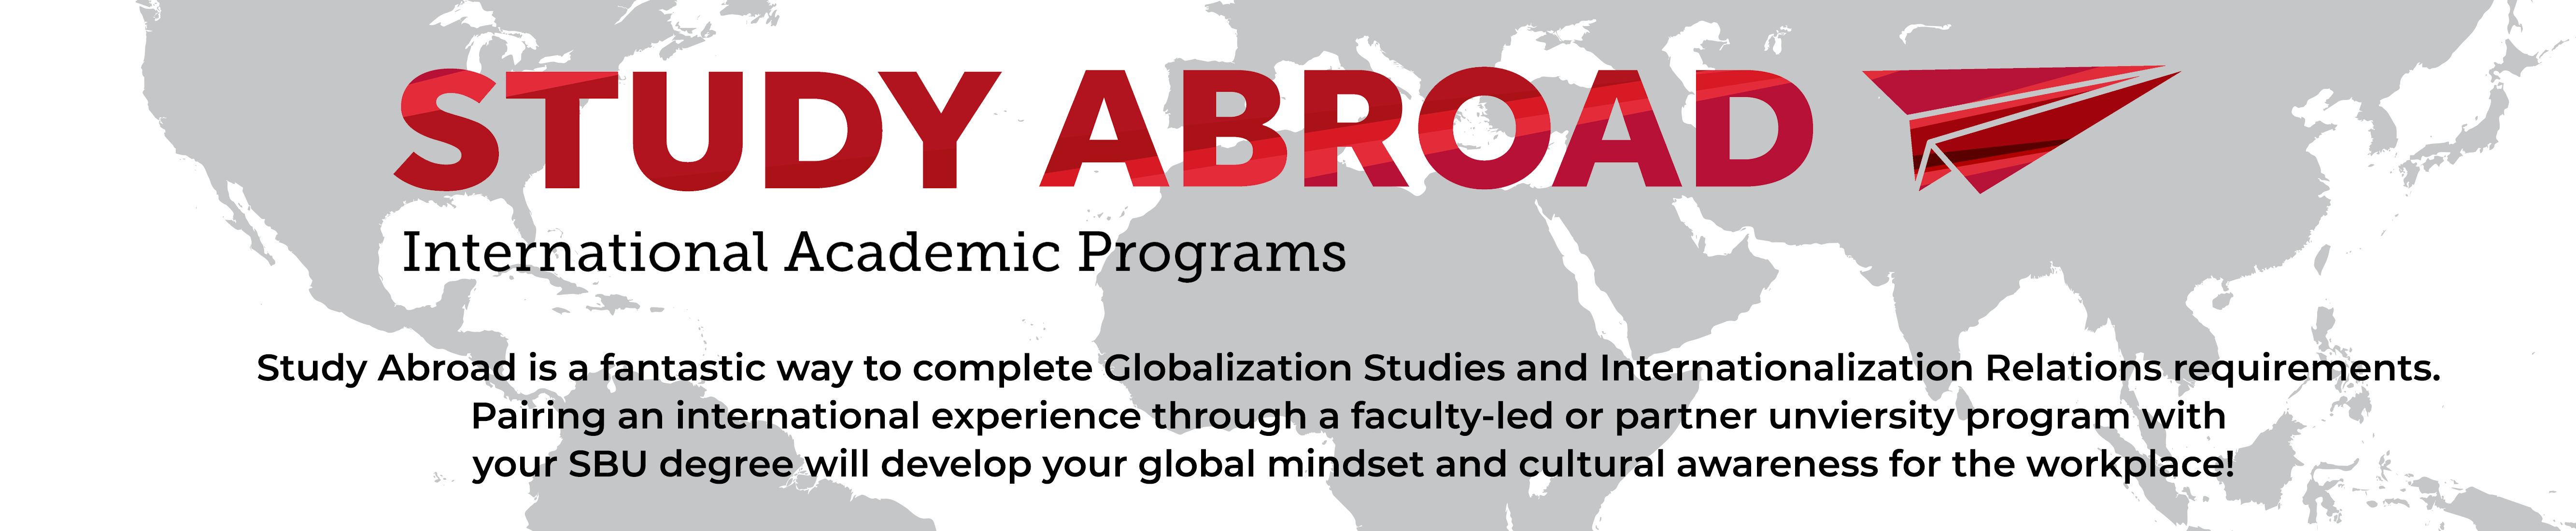 Study Abroad is a unique and immersive way to complete the GLI degree requirements and further engage in areas or issues of specialization.  A study abroad experience will make you standout!